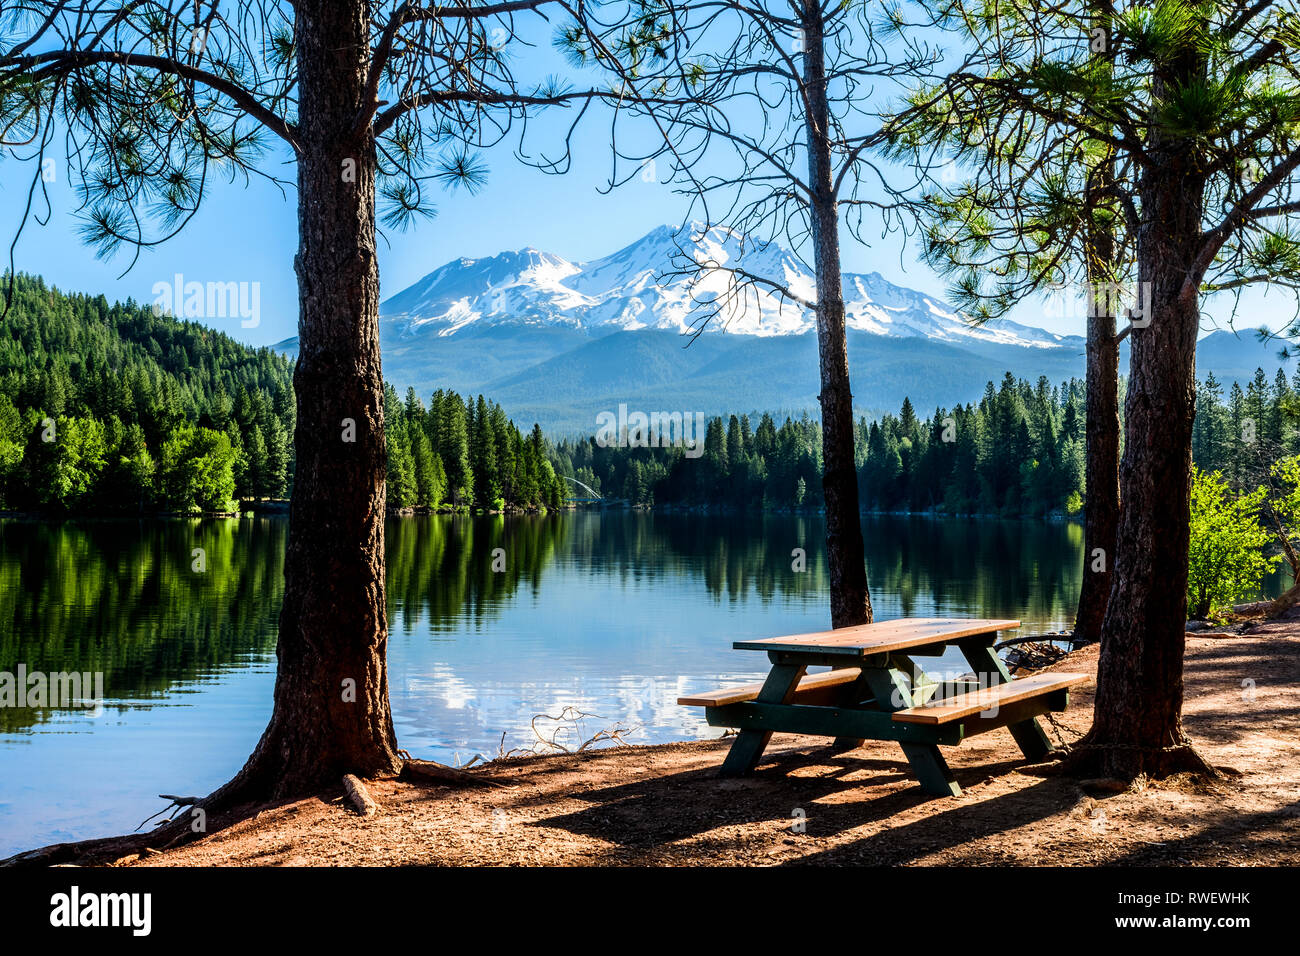 A picnic table at the edge of Siskiyou Lake in Lake Siskiyou Park near Mt. Shasta, California, USA.  Mt. Shasta is in the background. Stock Photo